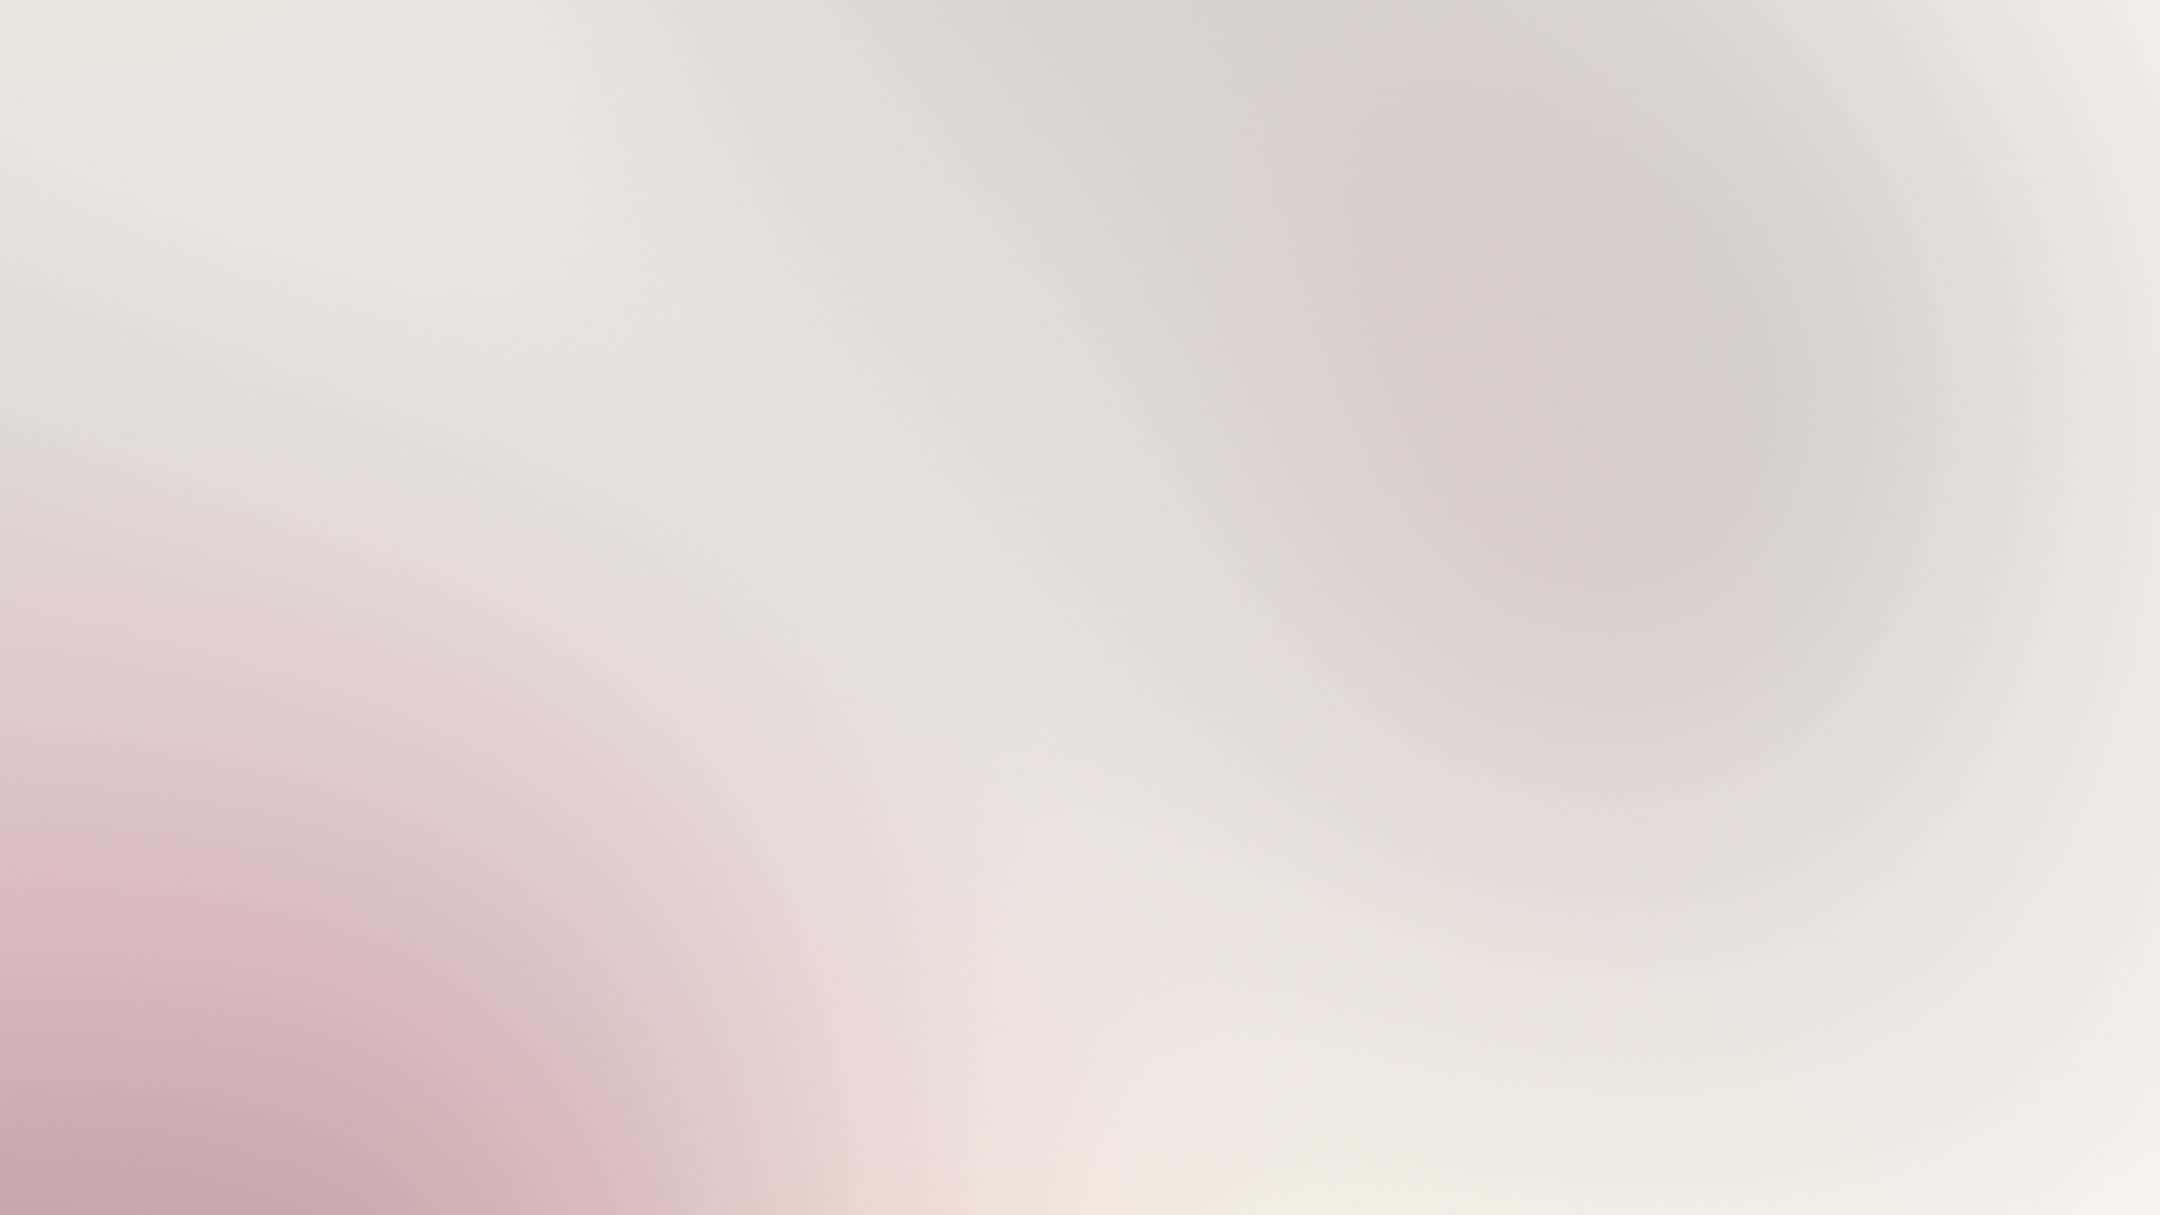 A White And Pink Abstract Background